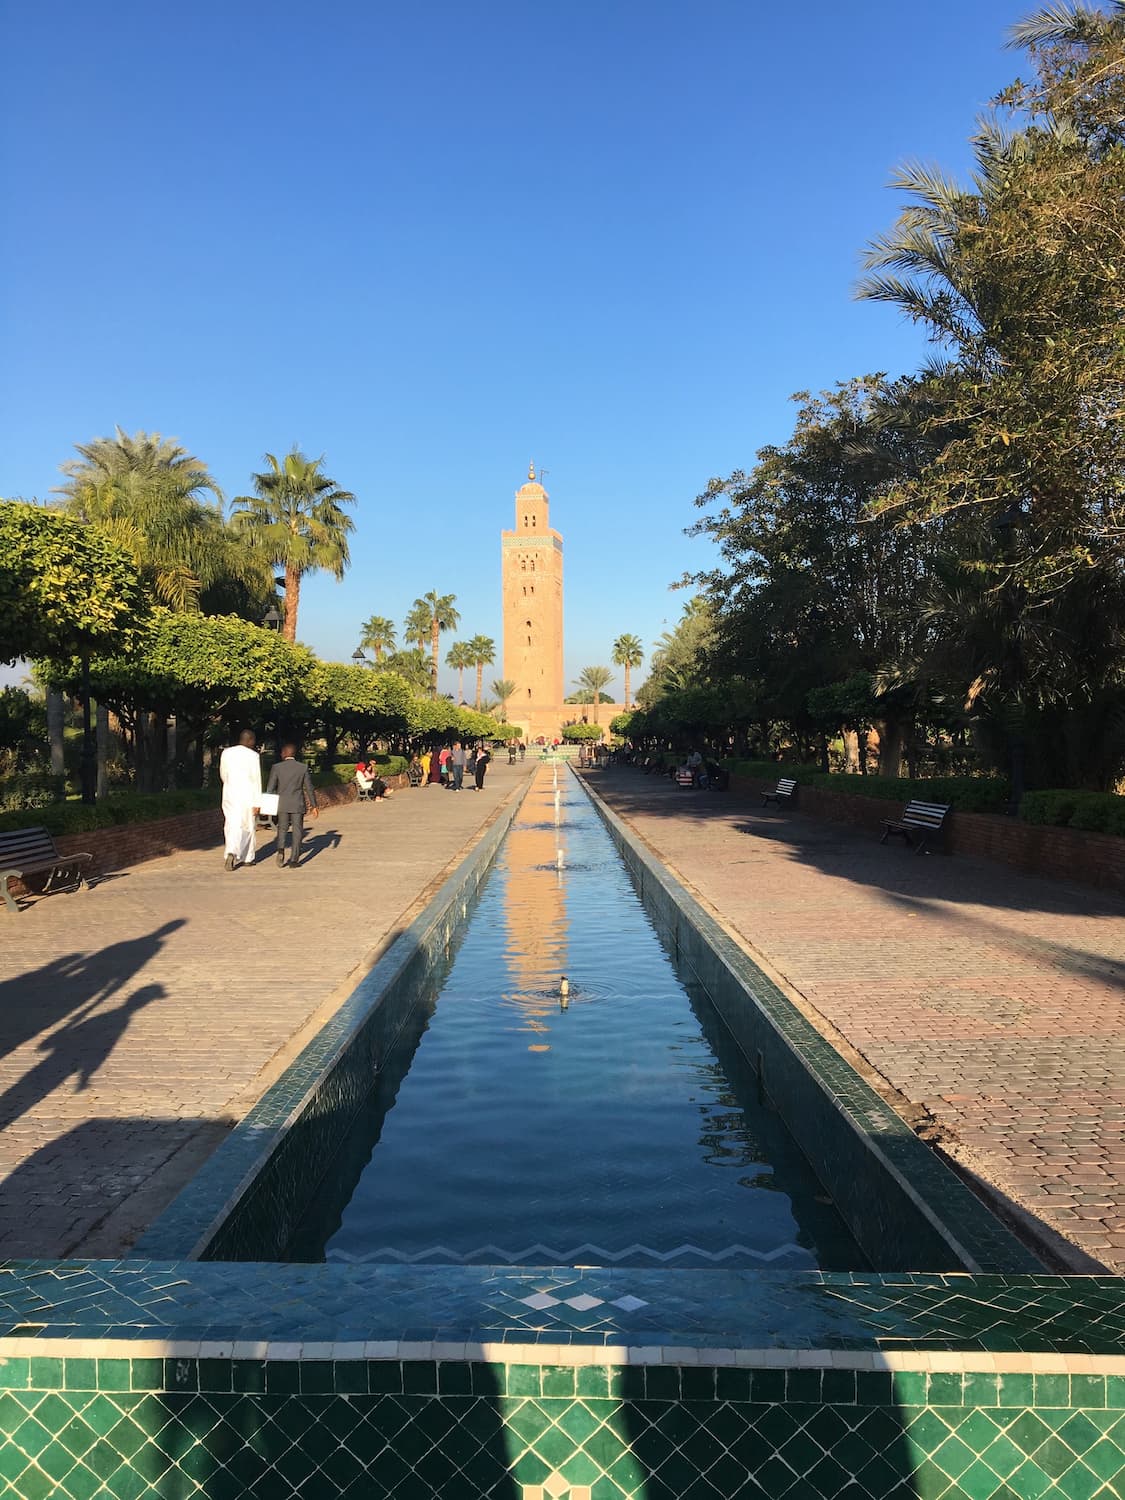 Water features leading to a minaret in Marrakesh